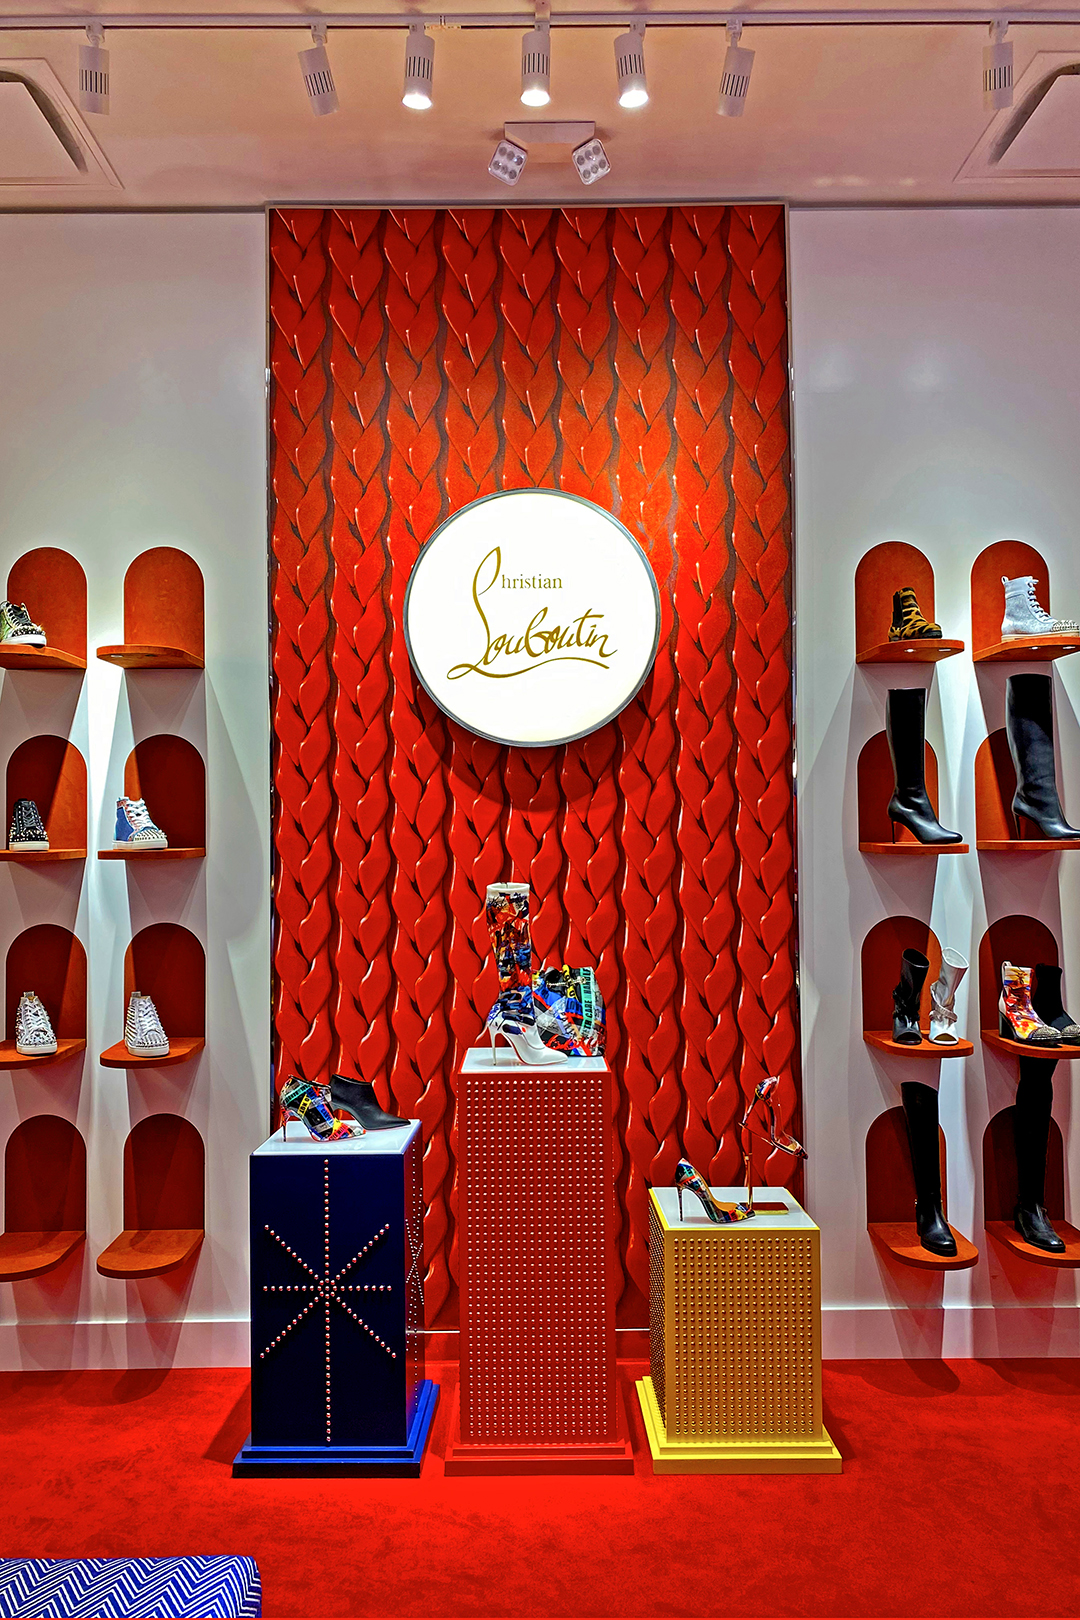 national angst adjektiv The Ultimate Christian Louboutin Outlet Shopping Guide - The Luxury Lowdown